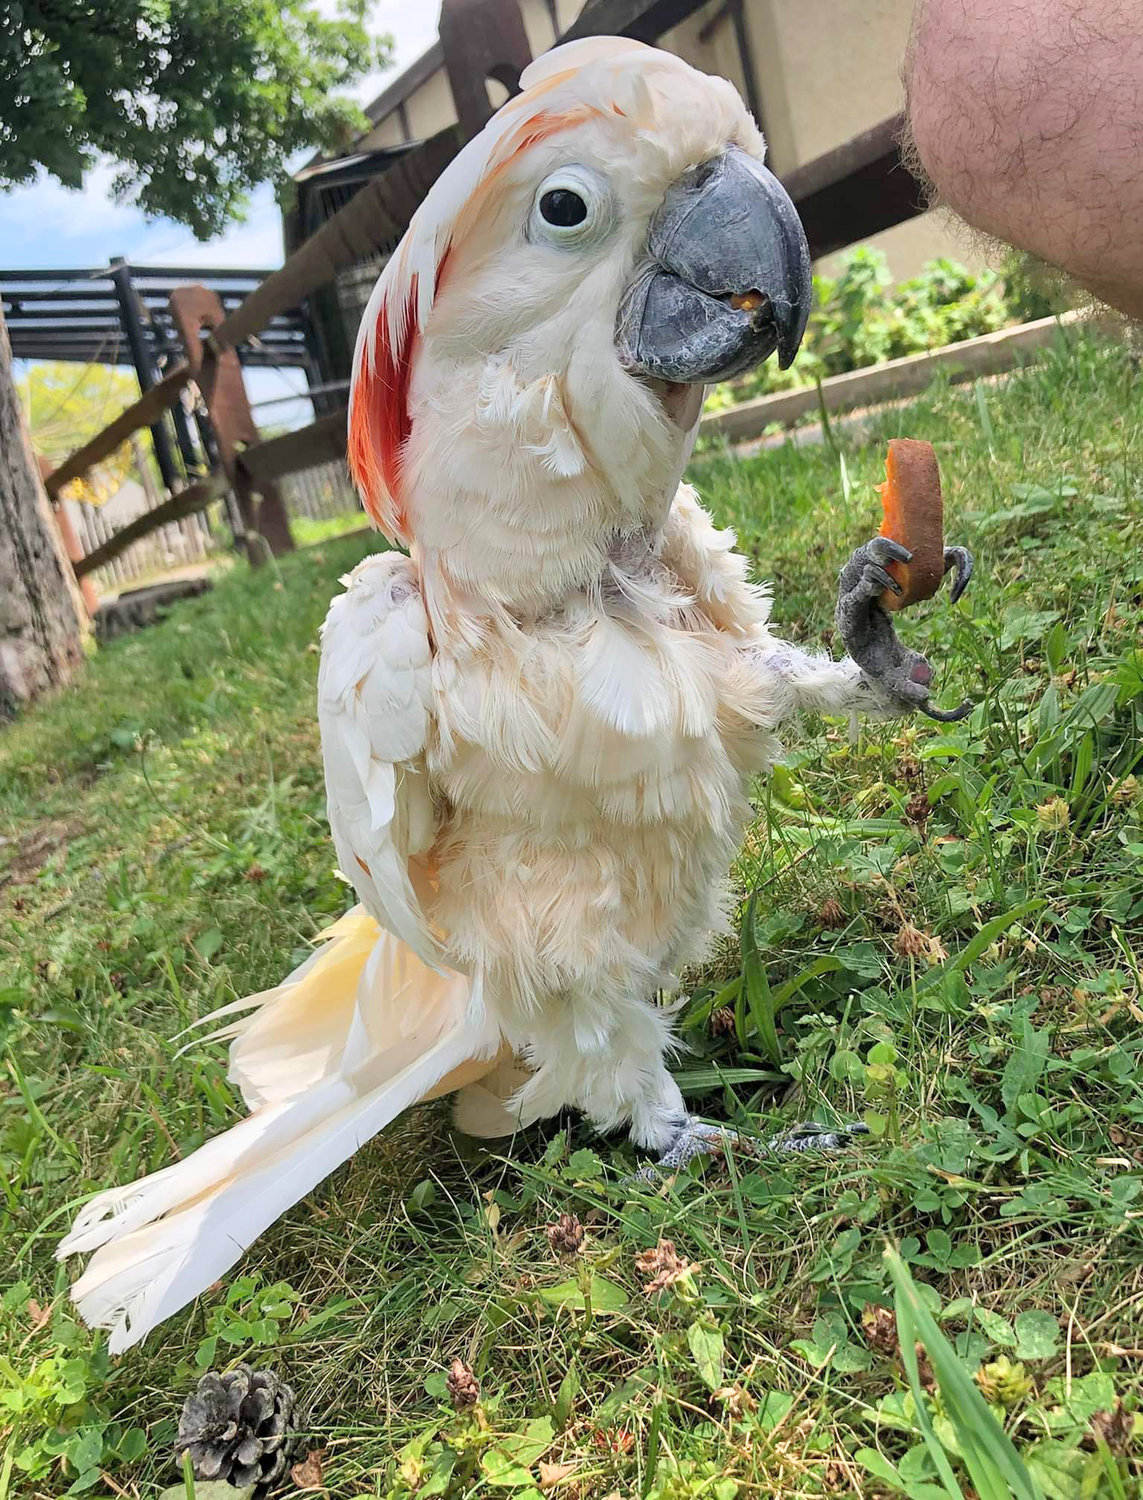 Polly the Cockatoo has died after living at the Utica Zoo for 53 years, zoo officials said. Polly was a longtime zoo ambassador who participated in many educational programs over the decades.